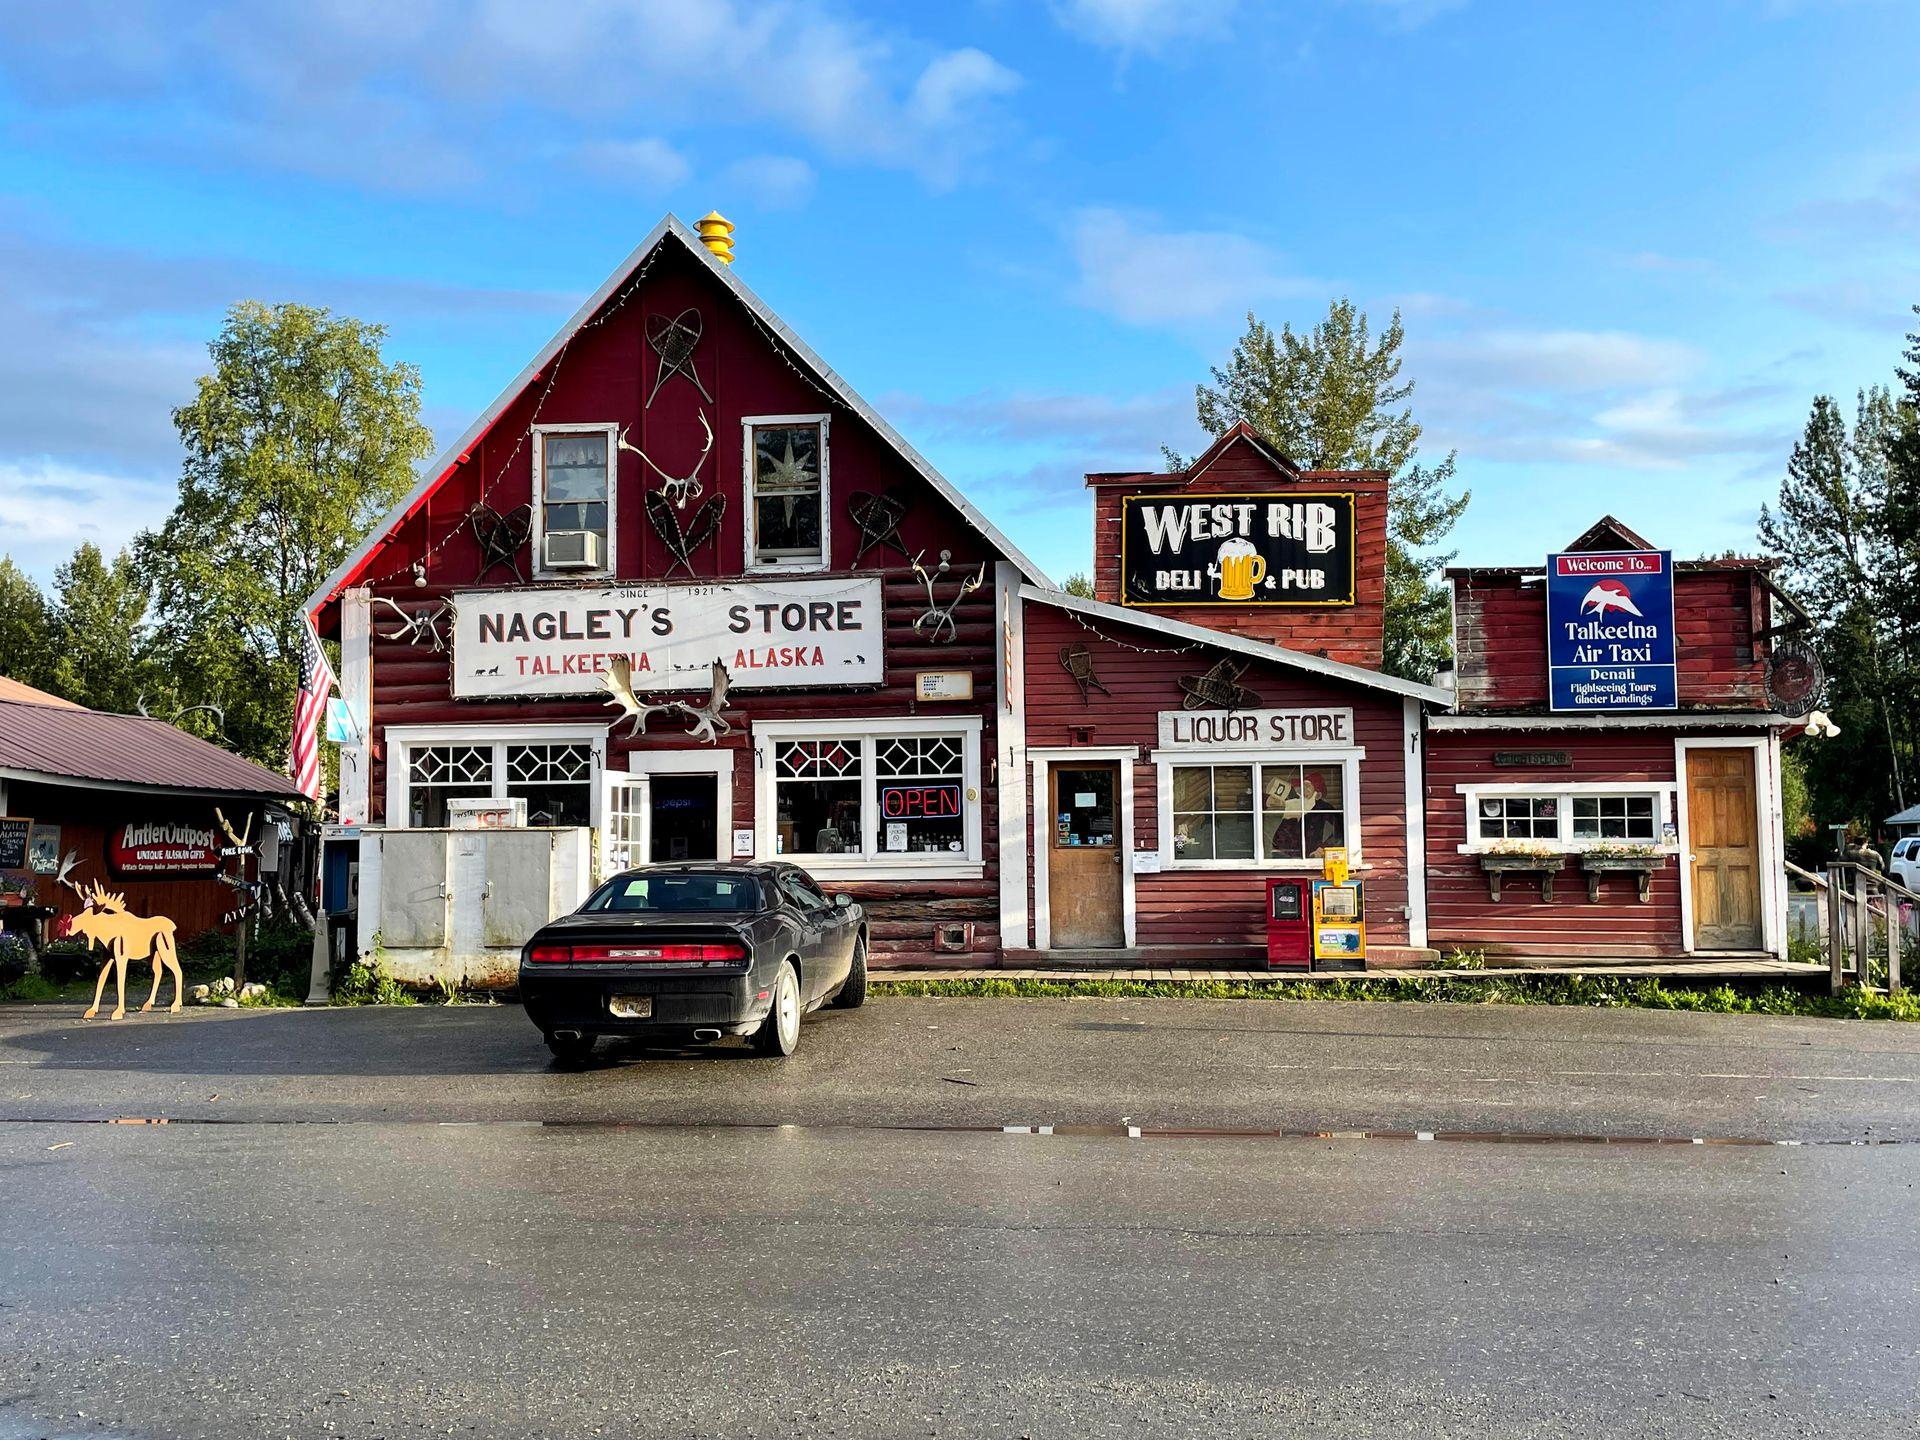 A view of Nagley's Store, a red building with white trim, in Talkeetna, Alaska.